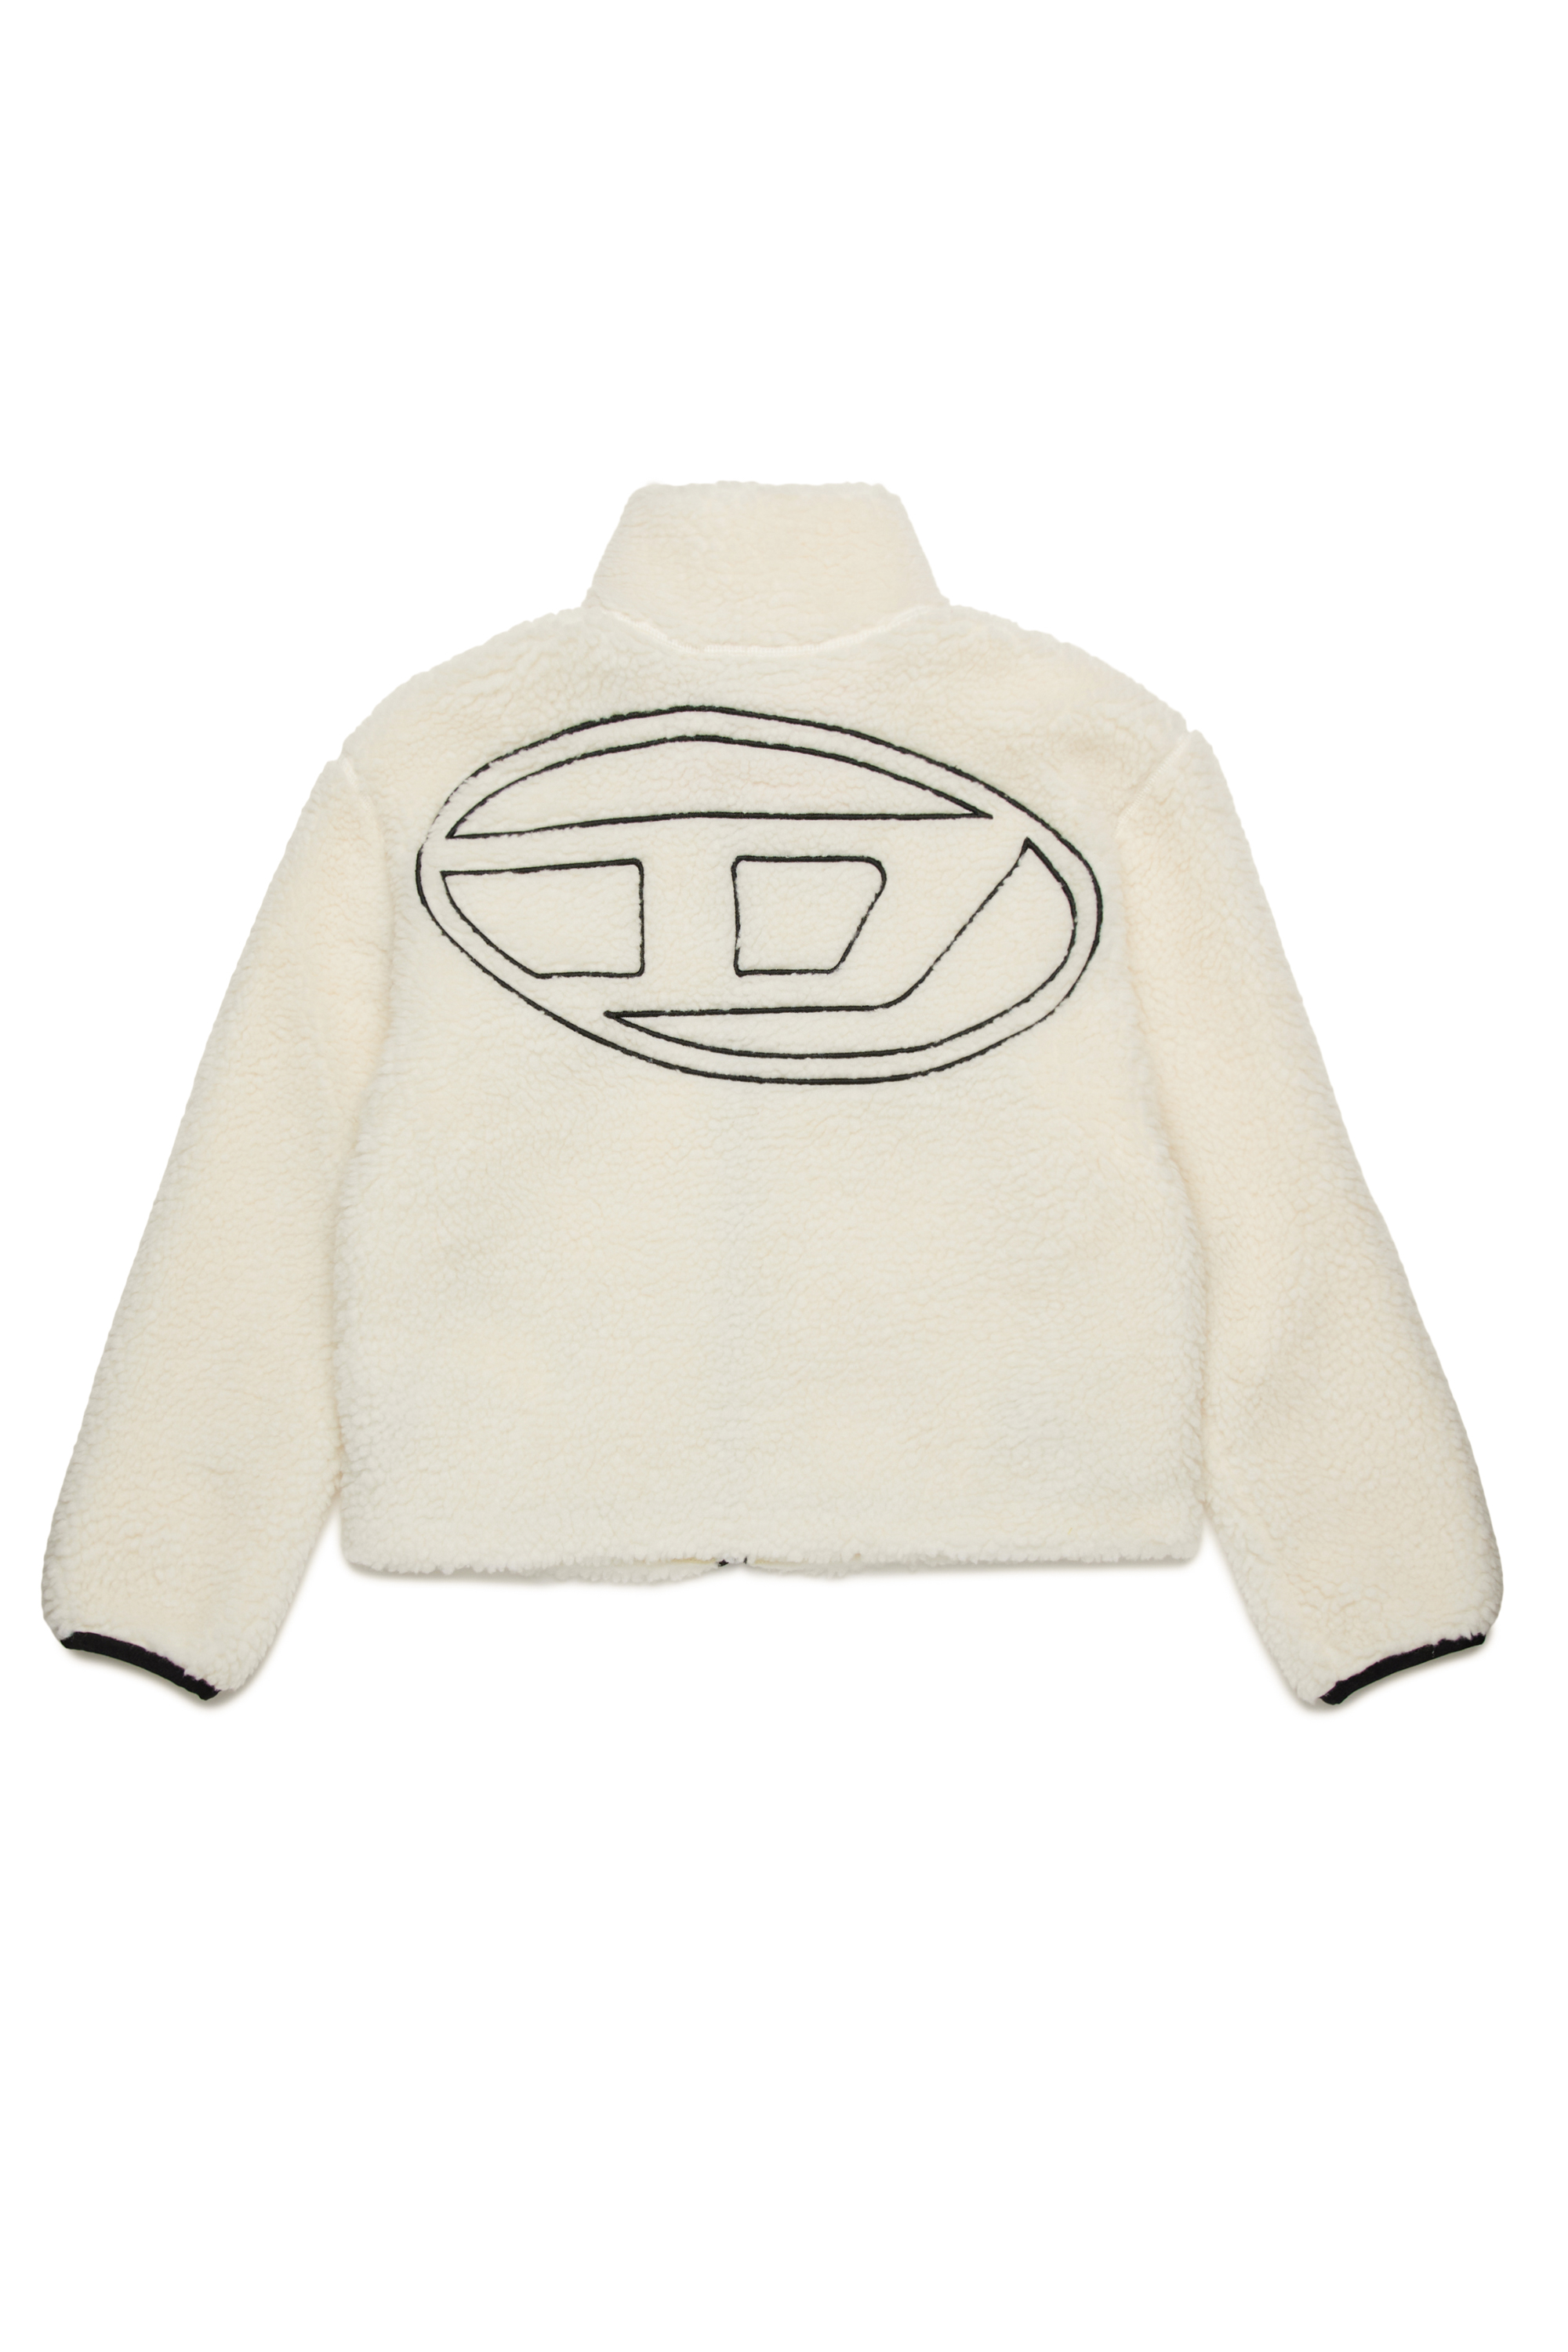 Diesel - JFCHIBI, Woman Teddy jacket with Oval D logo in White - Image 2